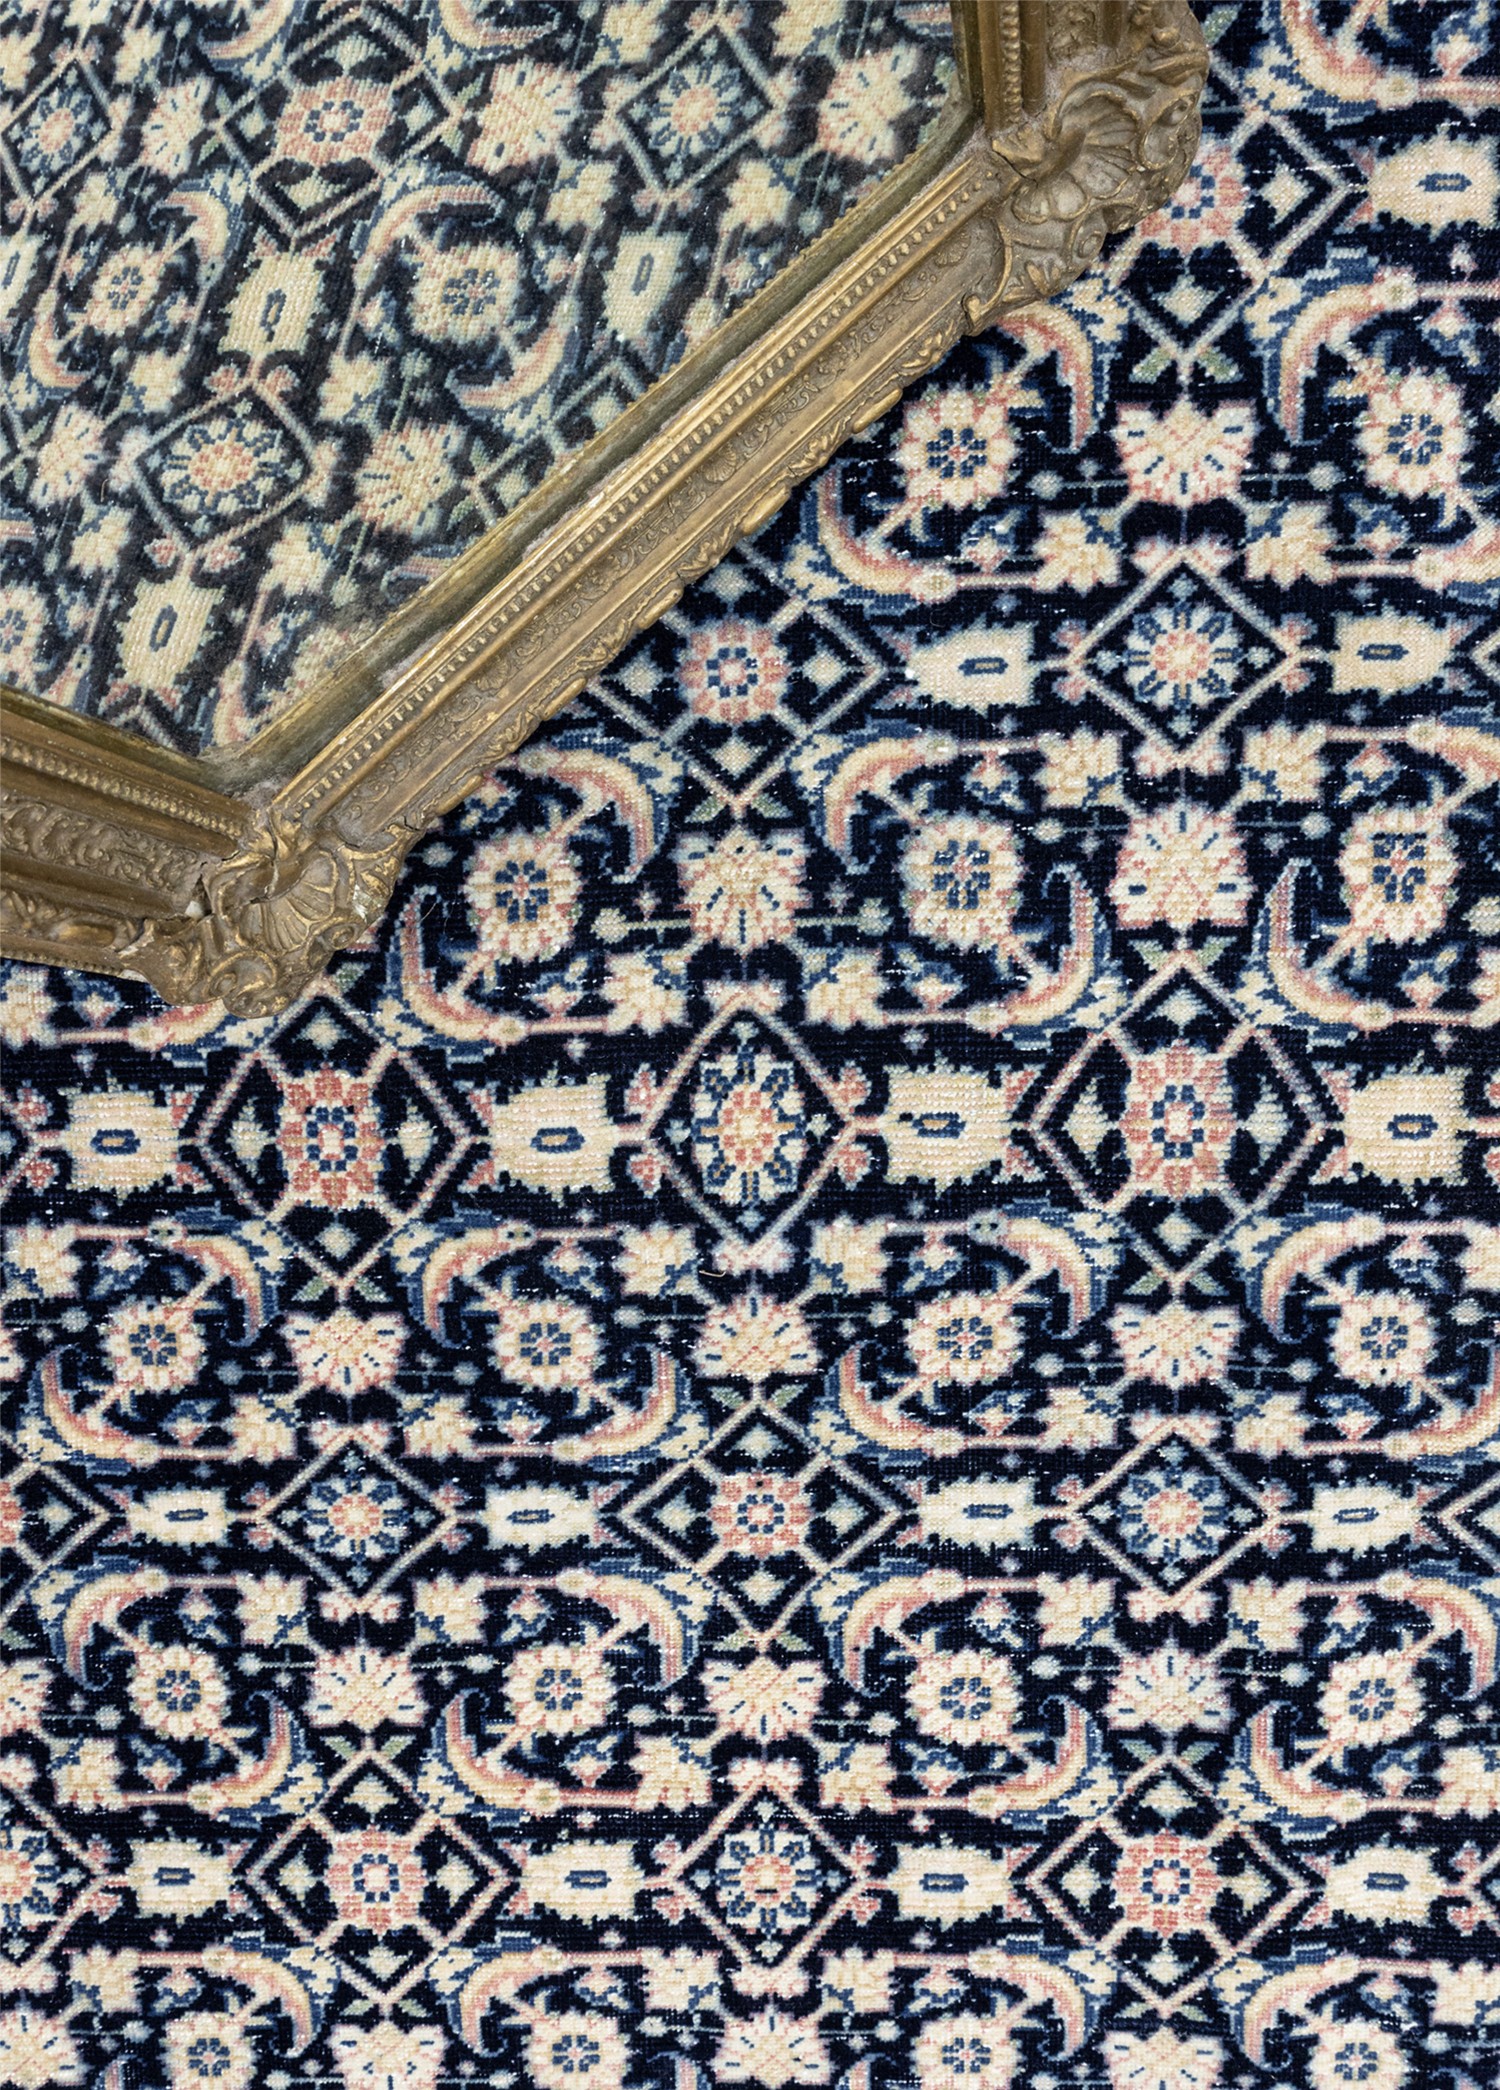 What Are the Features of Persian Rug?